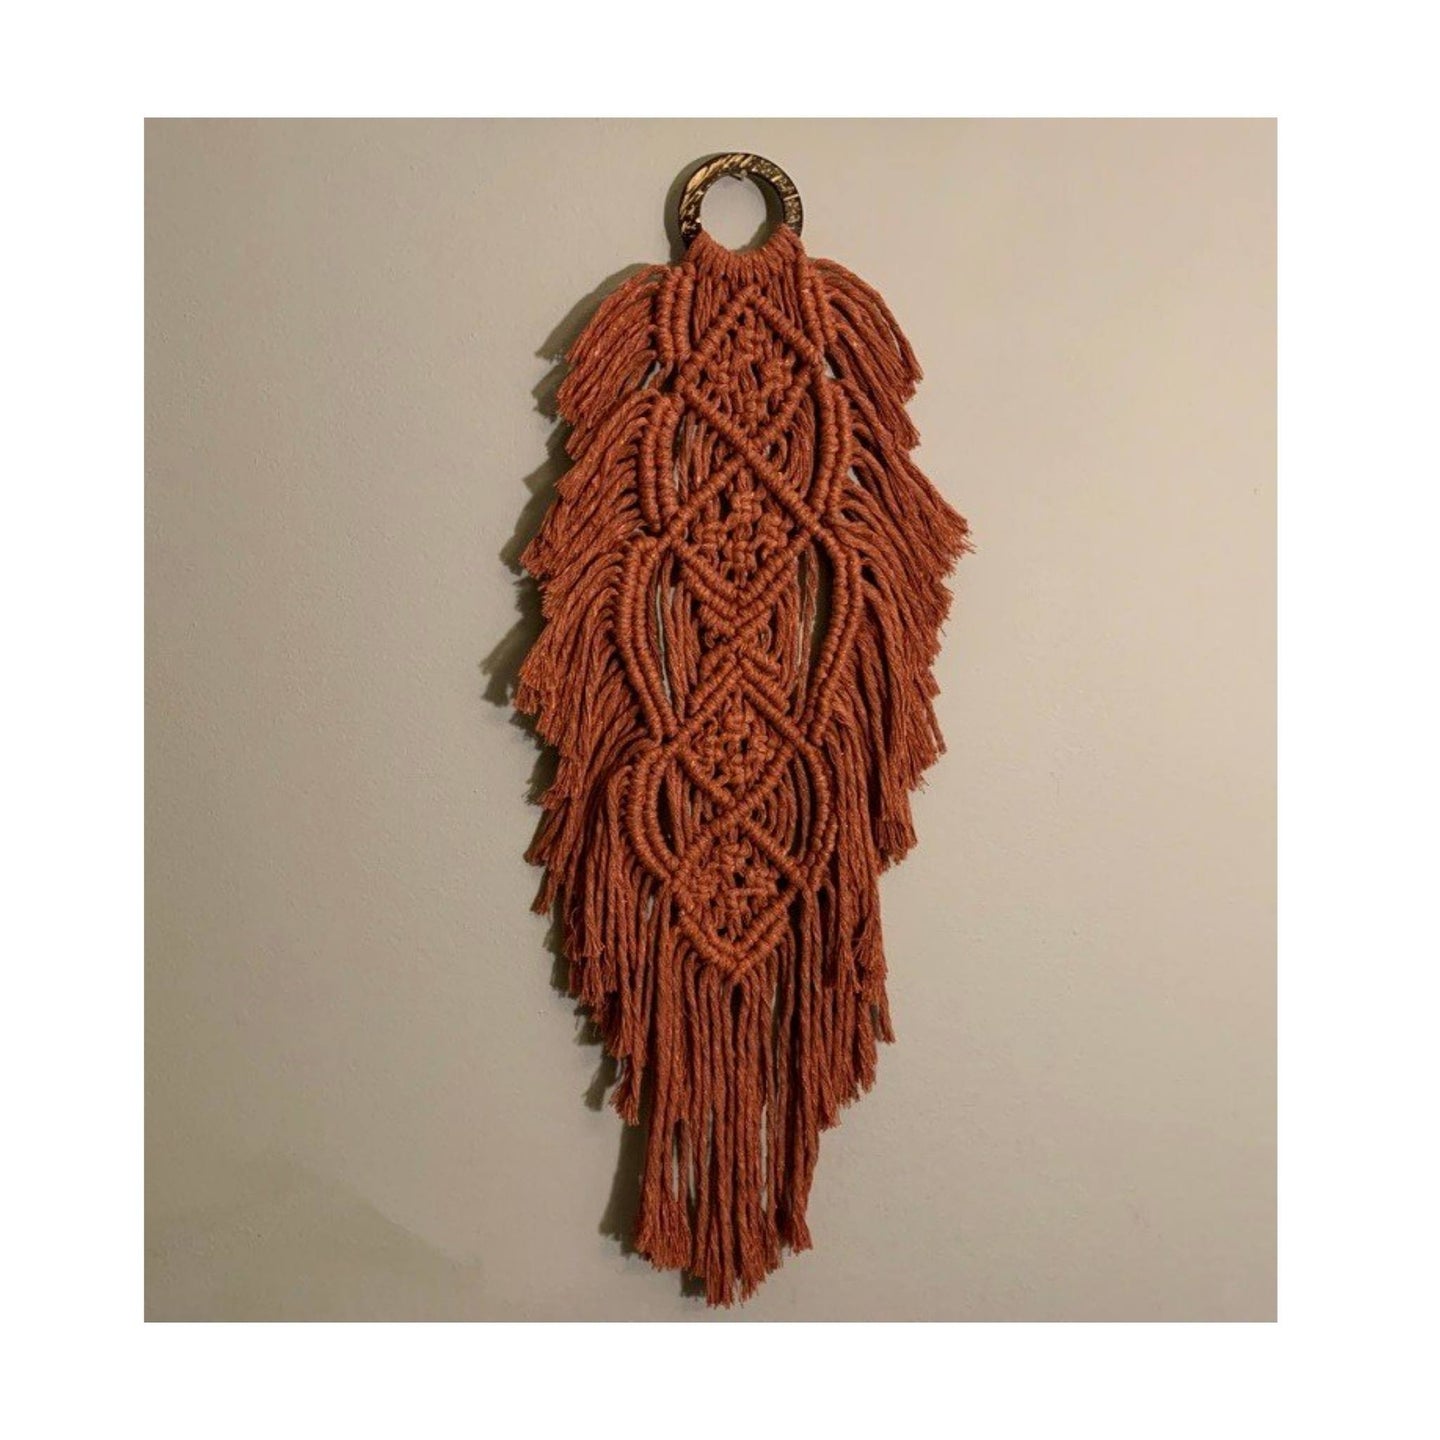 Phoenix is a beautiful macrame feather that’s the perfect accent for your wall. The ring has a gorgeous unique look as it’s made from coconut shell. You can mix and match any of the feathers or request them to be made in a variety of colors.